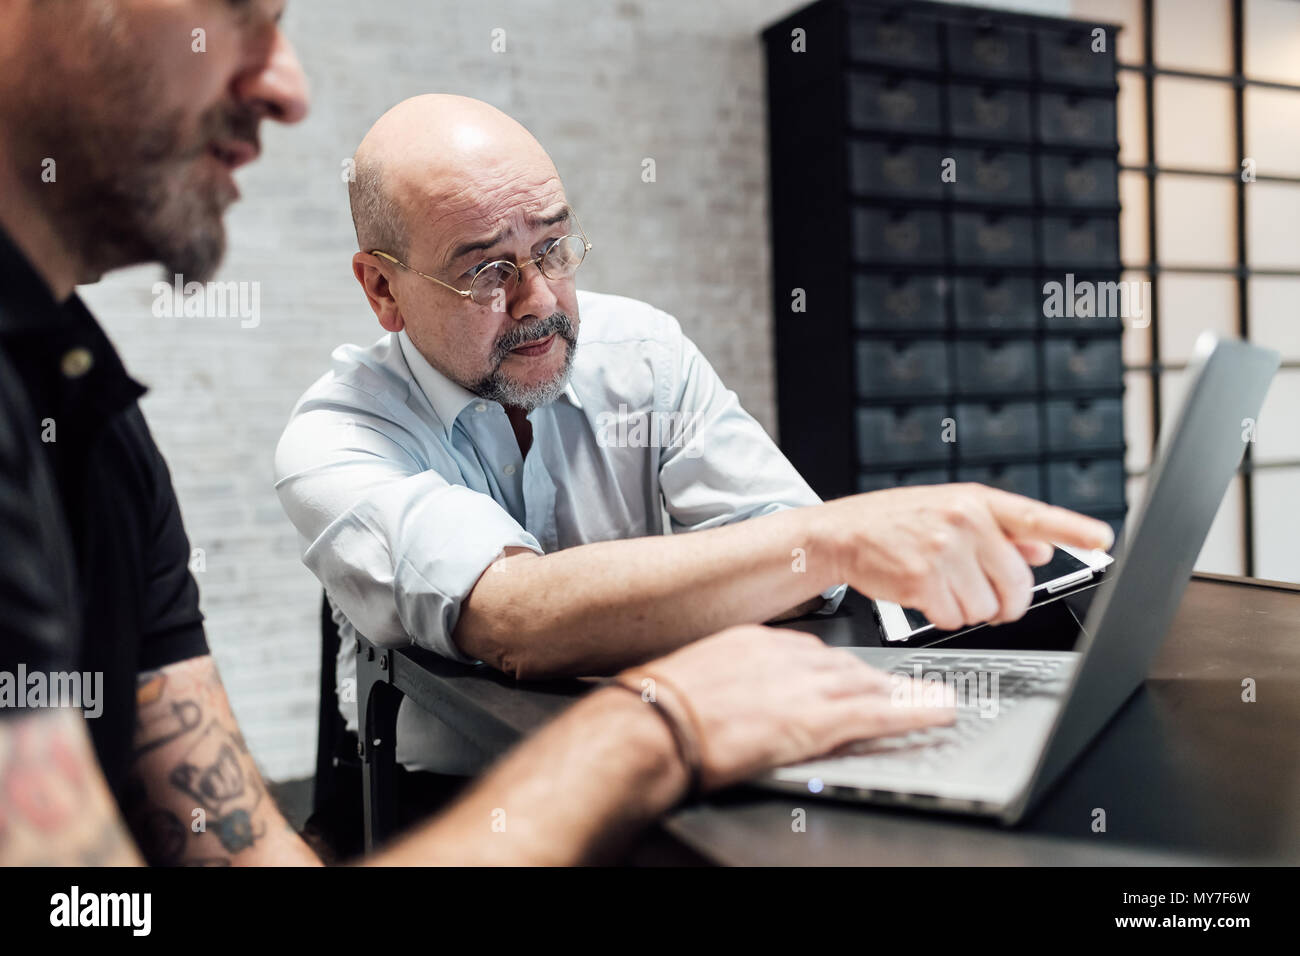 Colleagues looking at laptop together Stock Photo